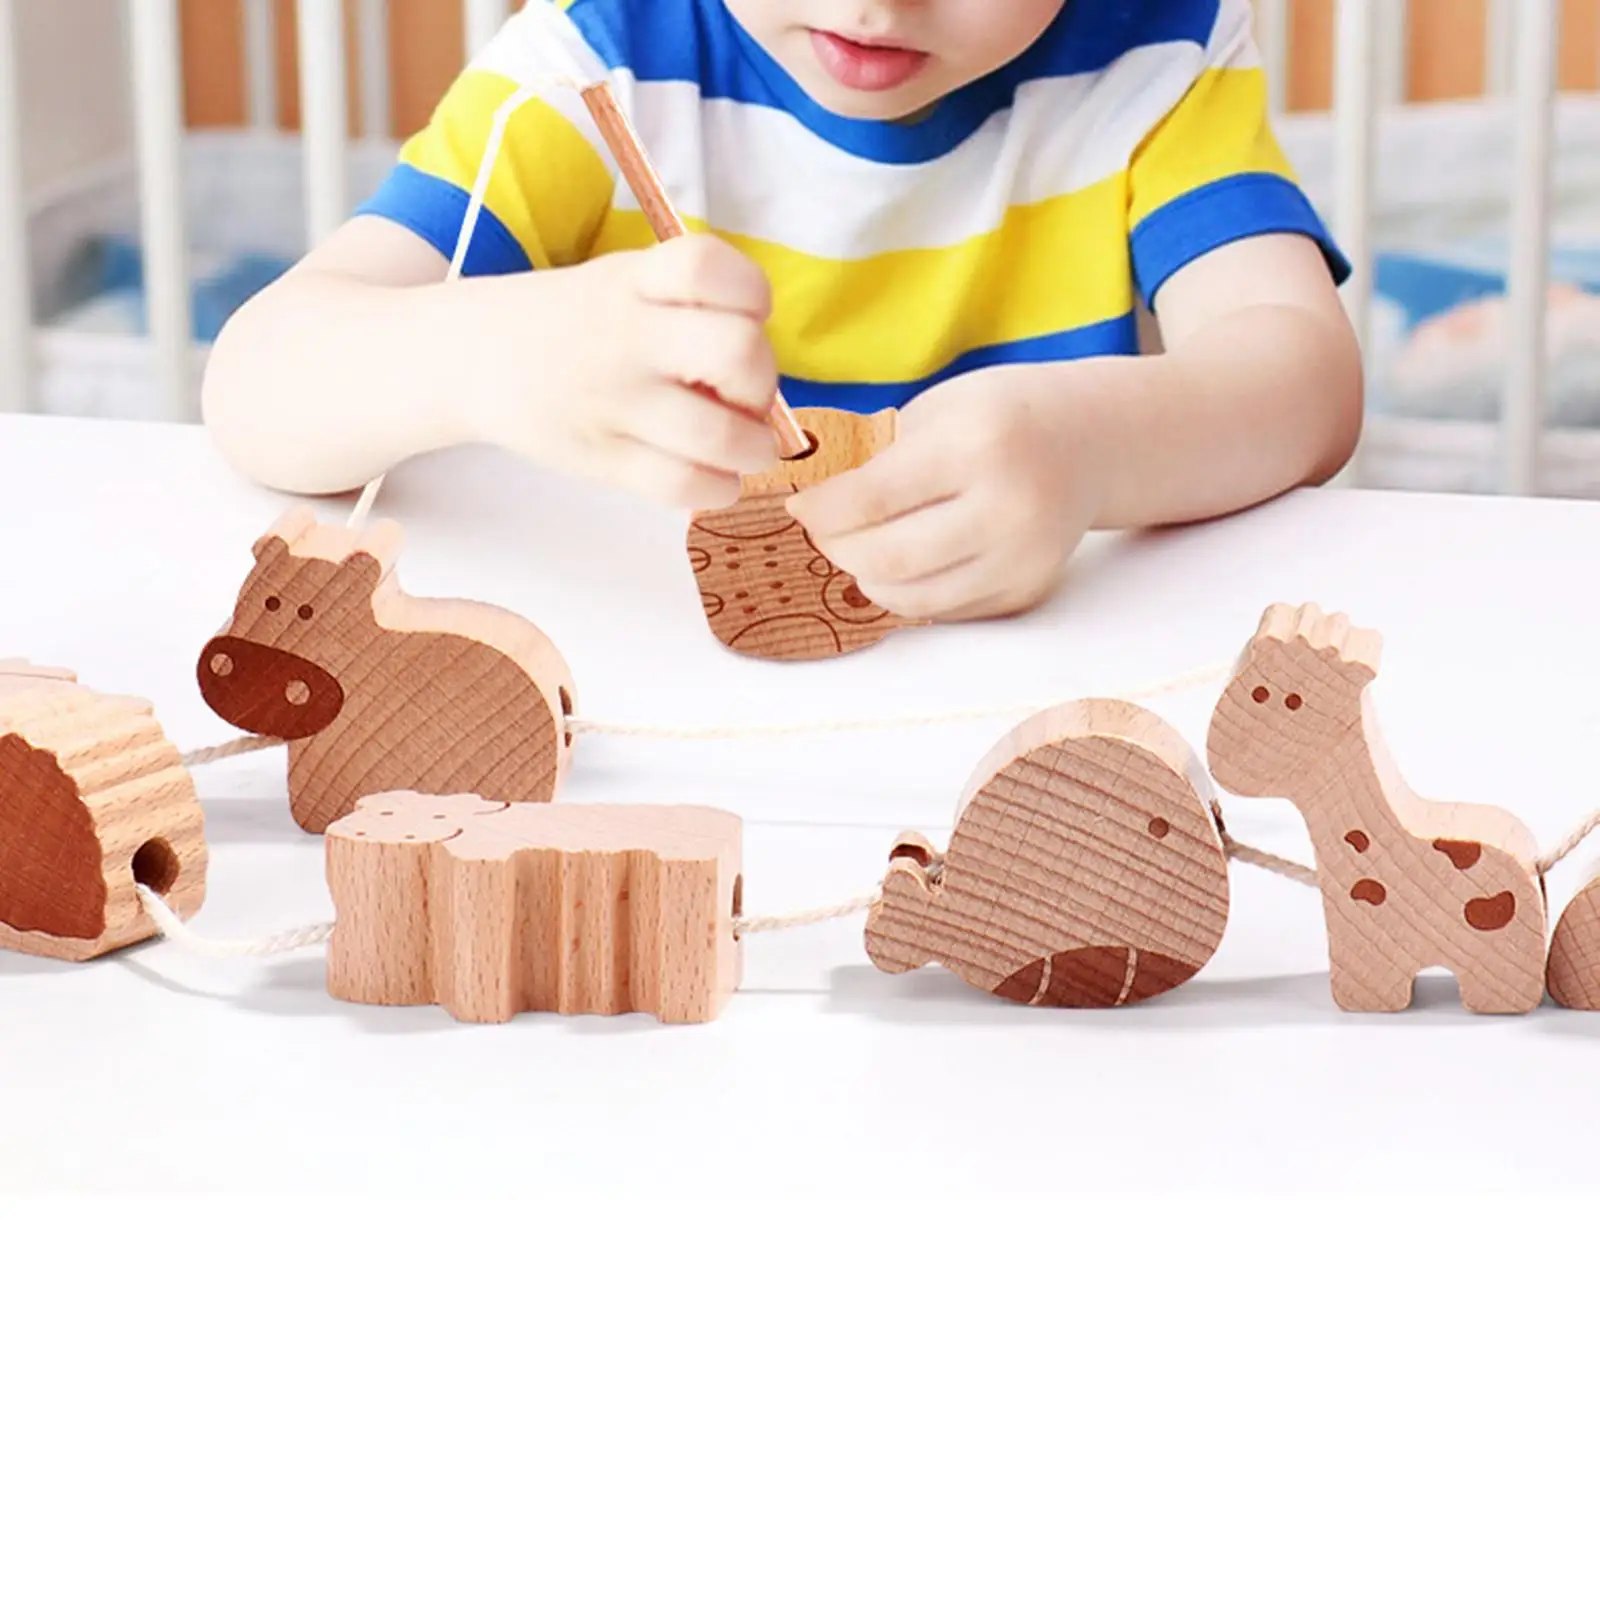 16 Pieces Animal Blocks Threading Toy Learning Activities for Birthday Gift